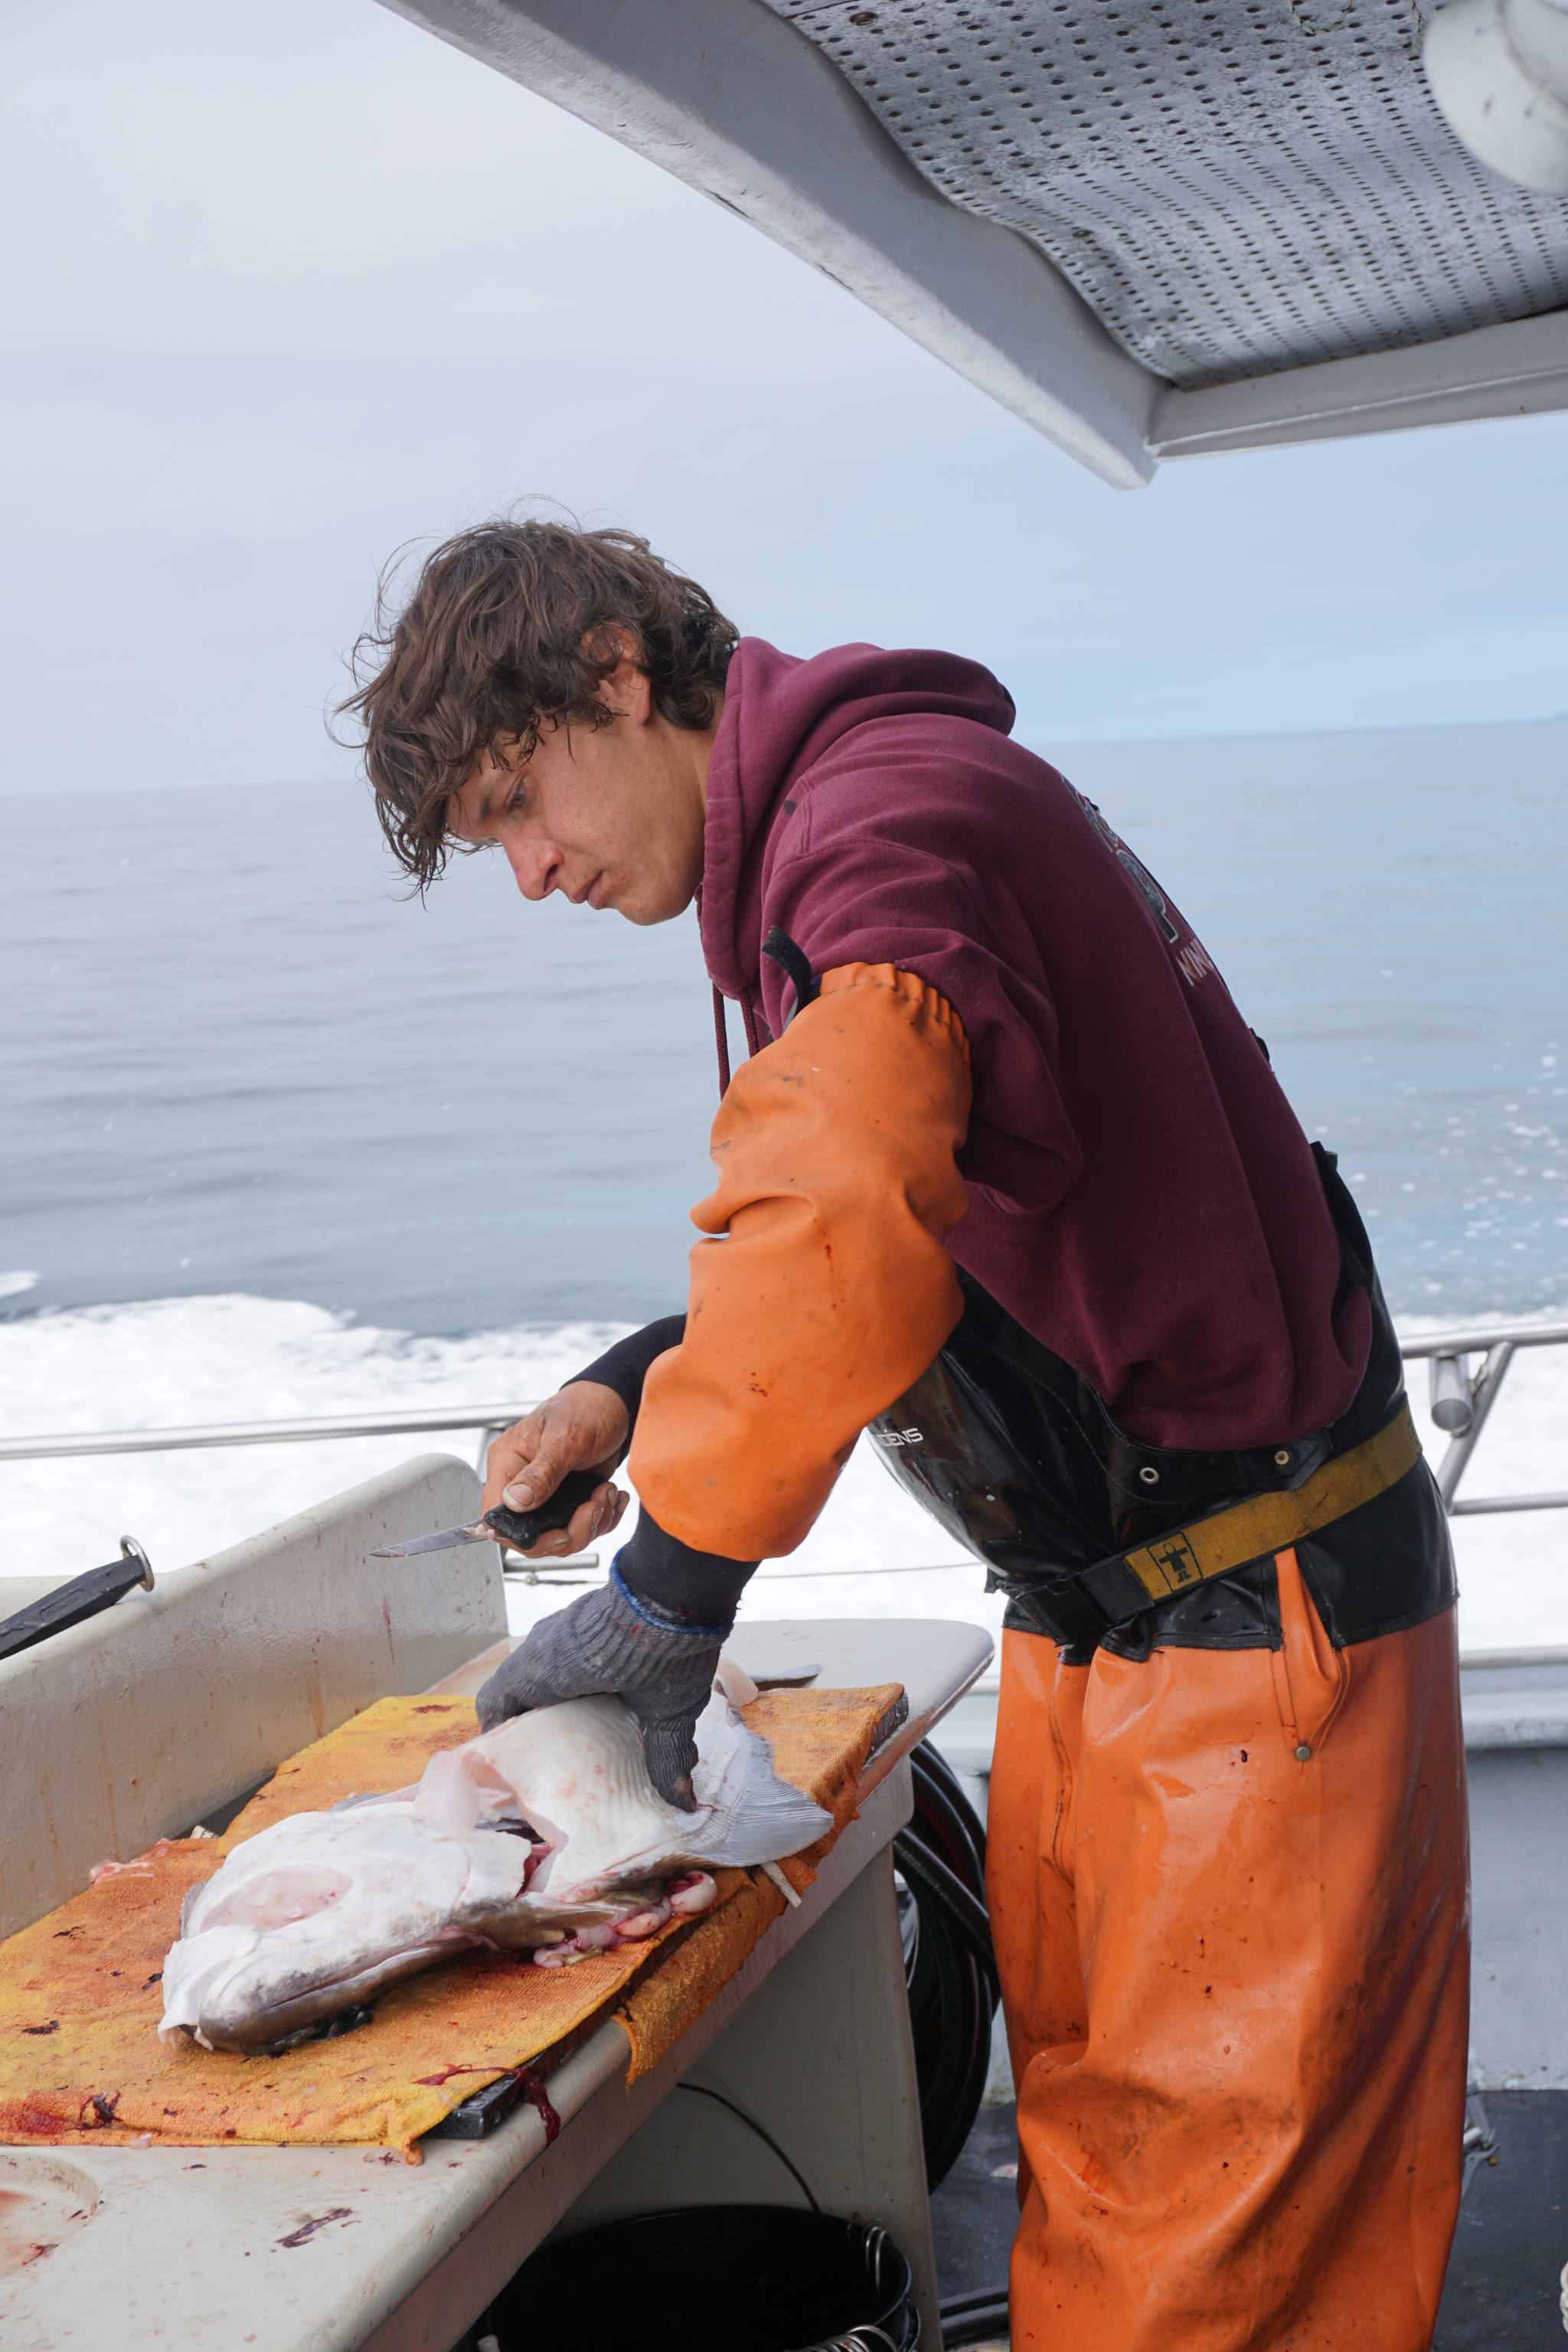 Casey McKinnon fillets a halibut as the Irish returns to Homer, Alaska from a halibut fishing trip in Cook Inlet near Mount Iliamna July 16, 2017. According to federal regulations, halibut can be filleted on board into four bottom and top pieces as long as the skin is retained and the carcass for a size-restricted fish is kept. Photo by Michael Armstrong/Homer News